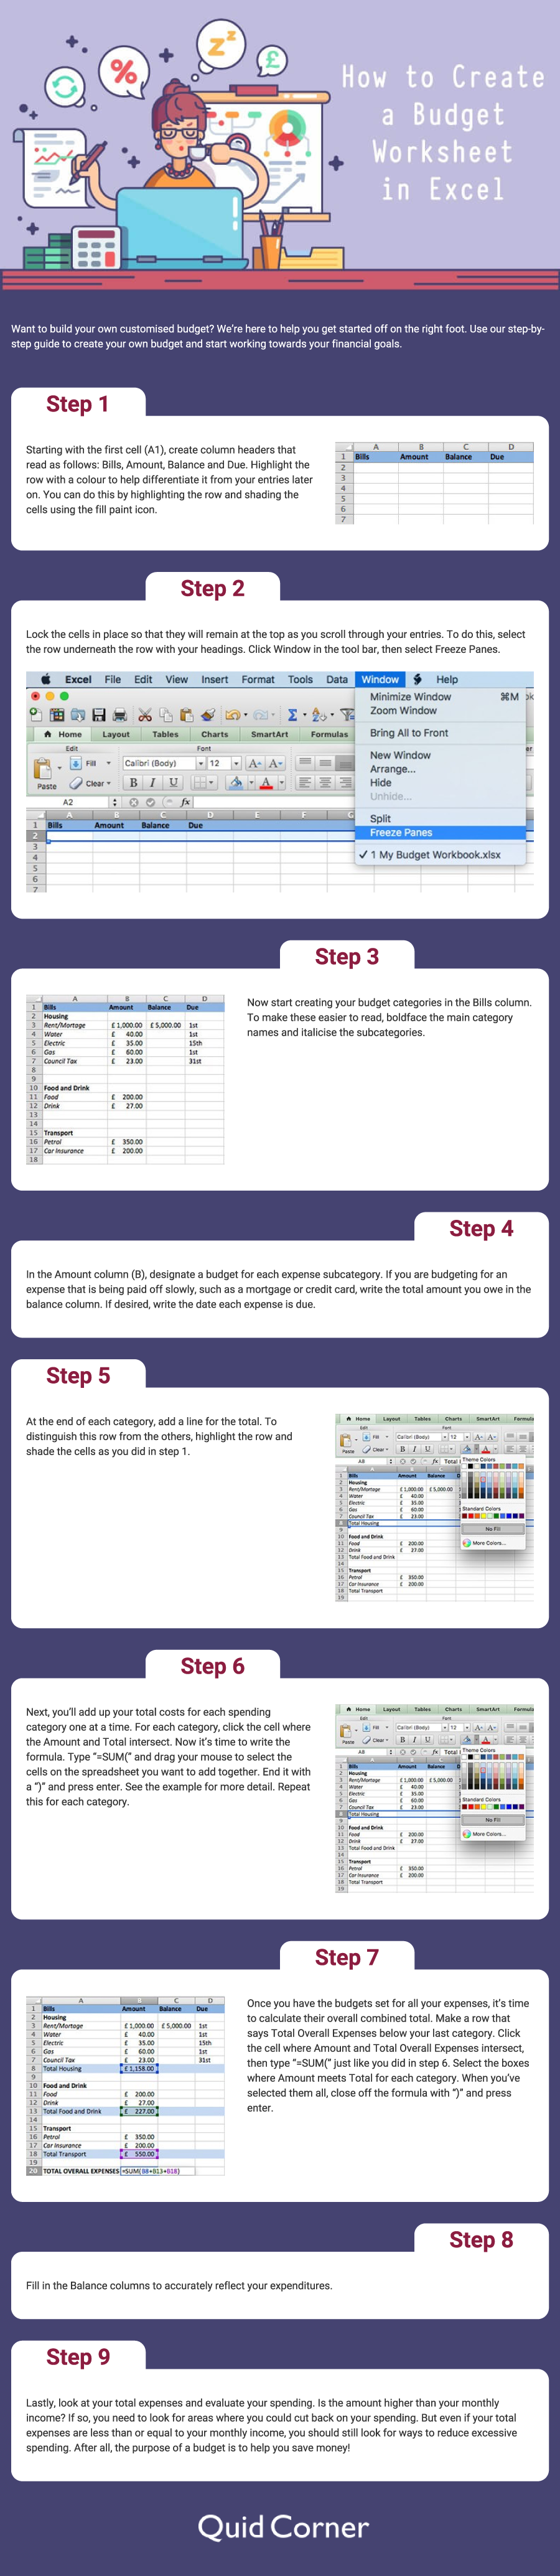 How to Create a Budget Worksheet in Excel - #infographic